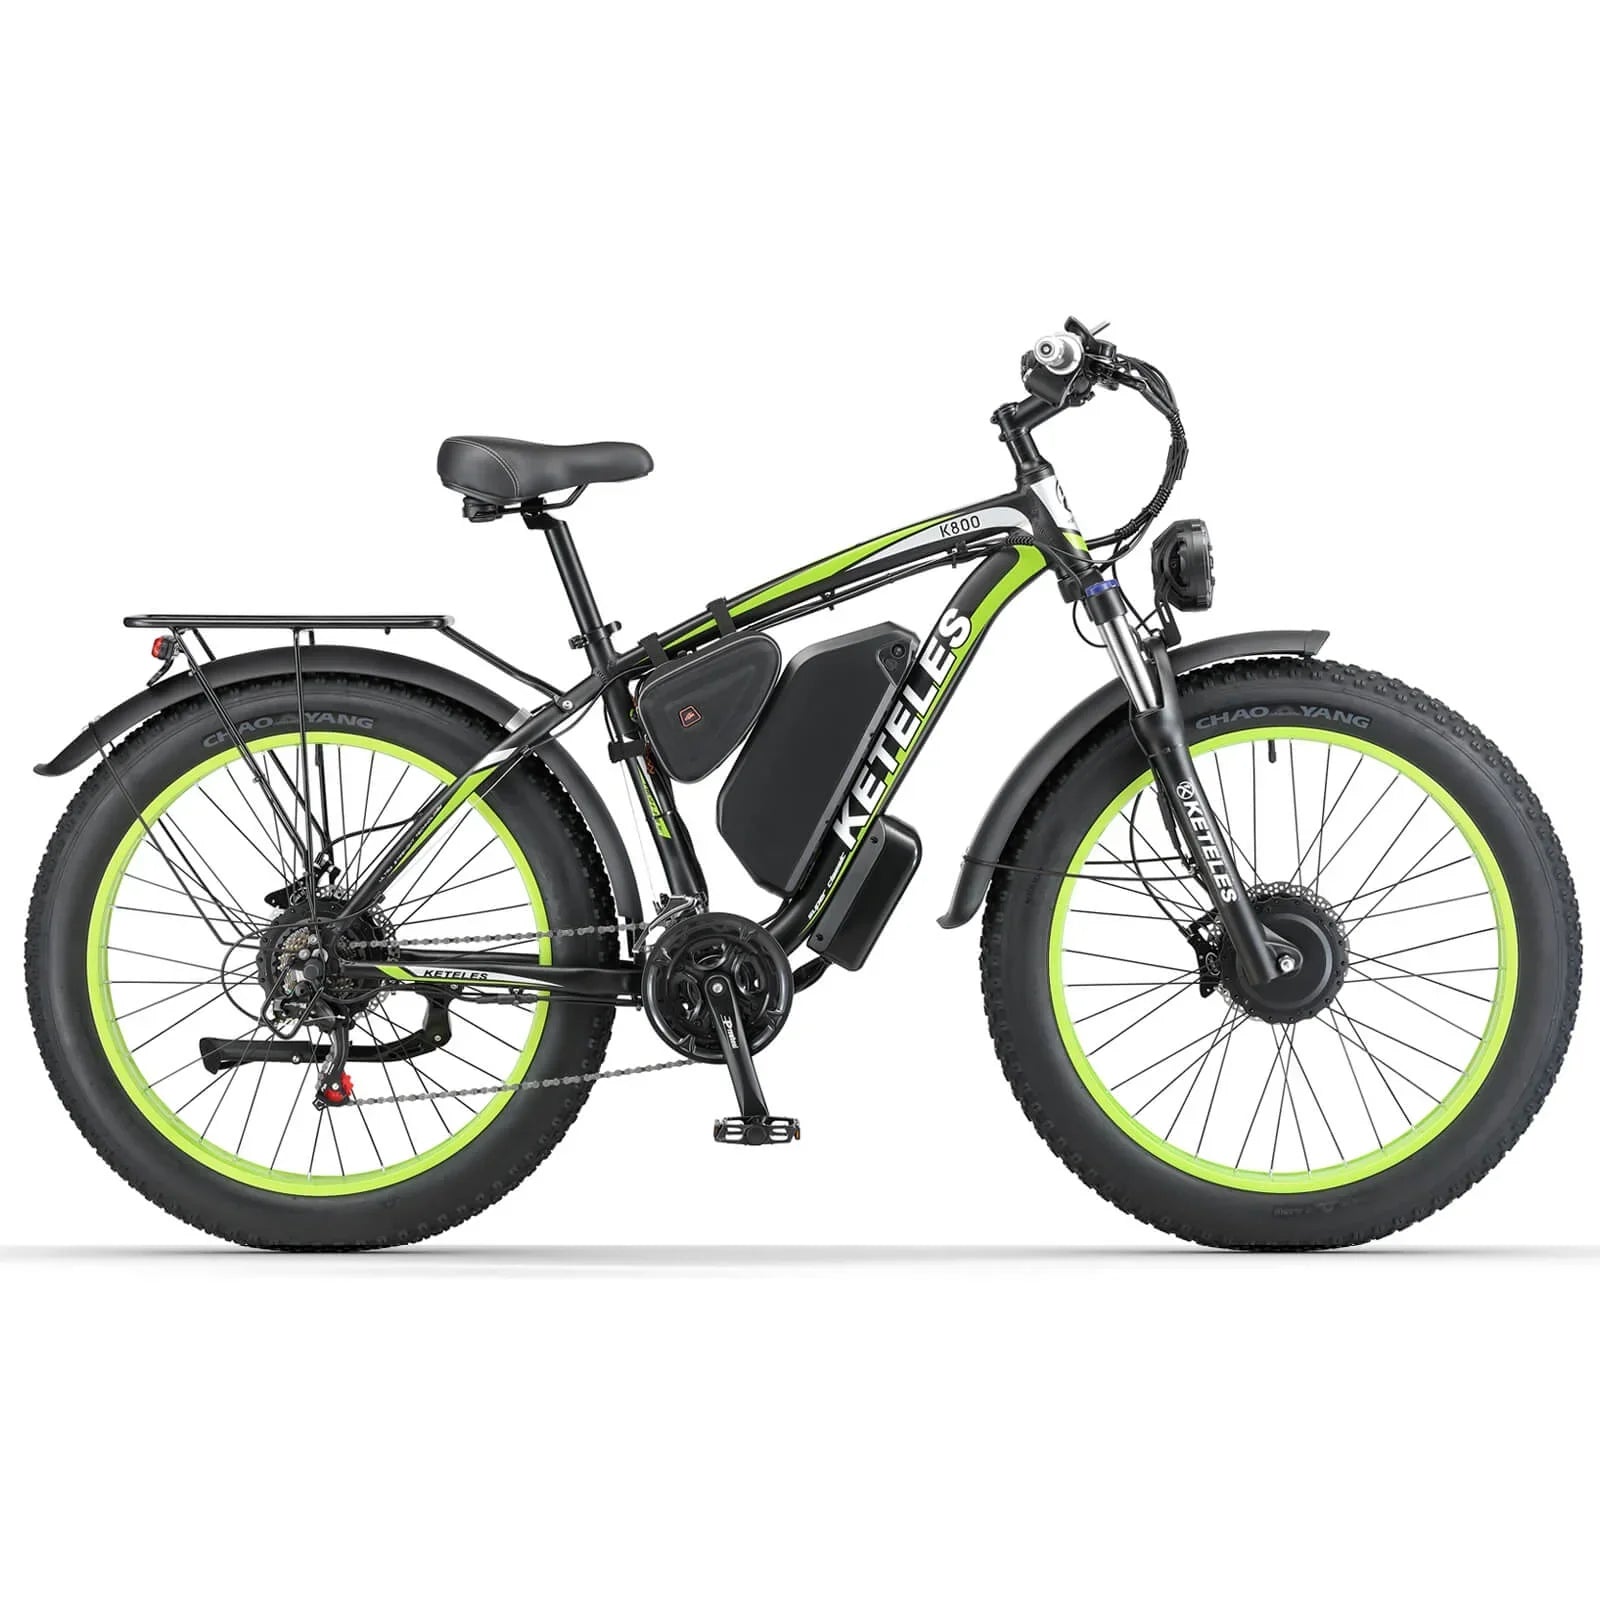 KETELES K800 2×1000W dual Motors Electric Bike - Preorder - Pogo cycles UK -cycle to work scheme available